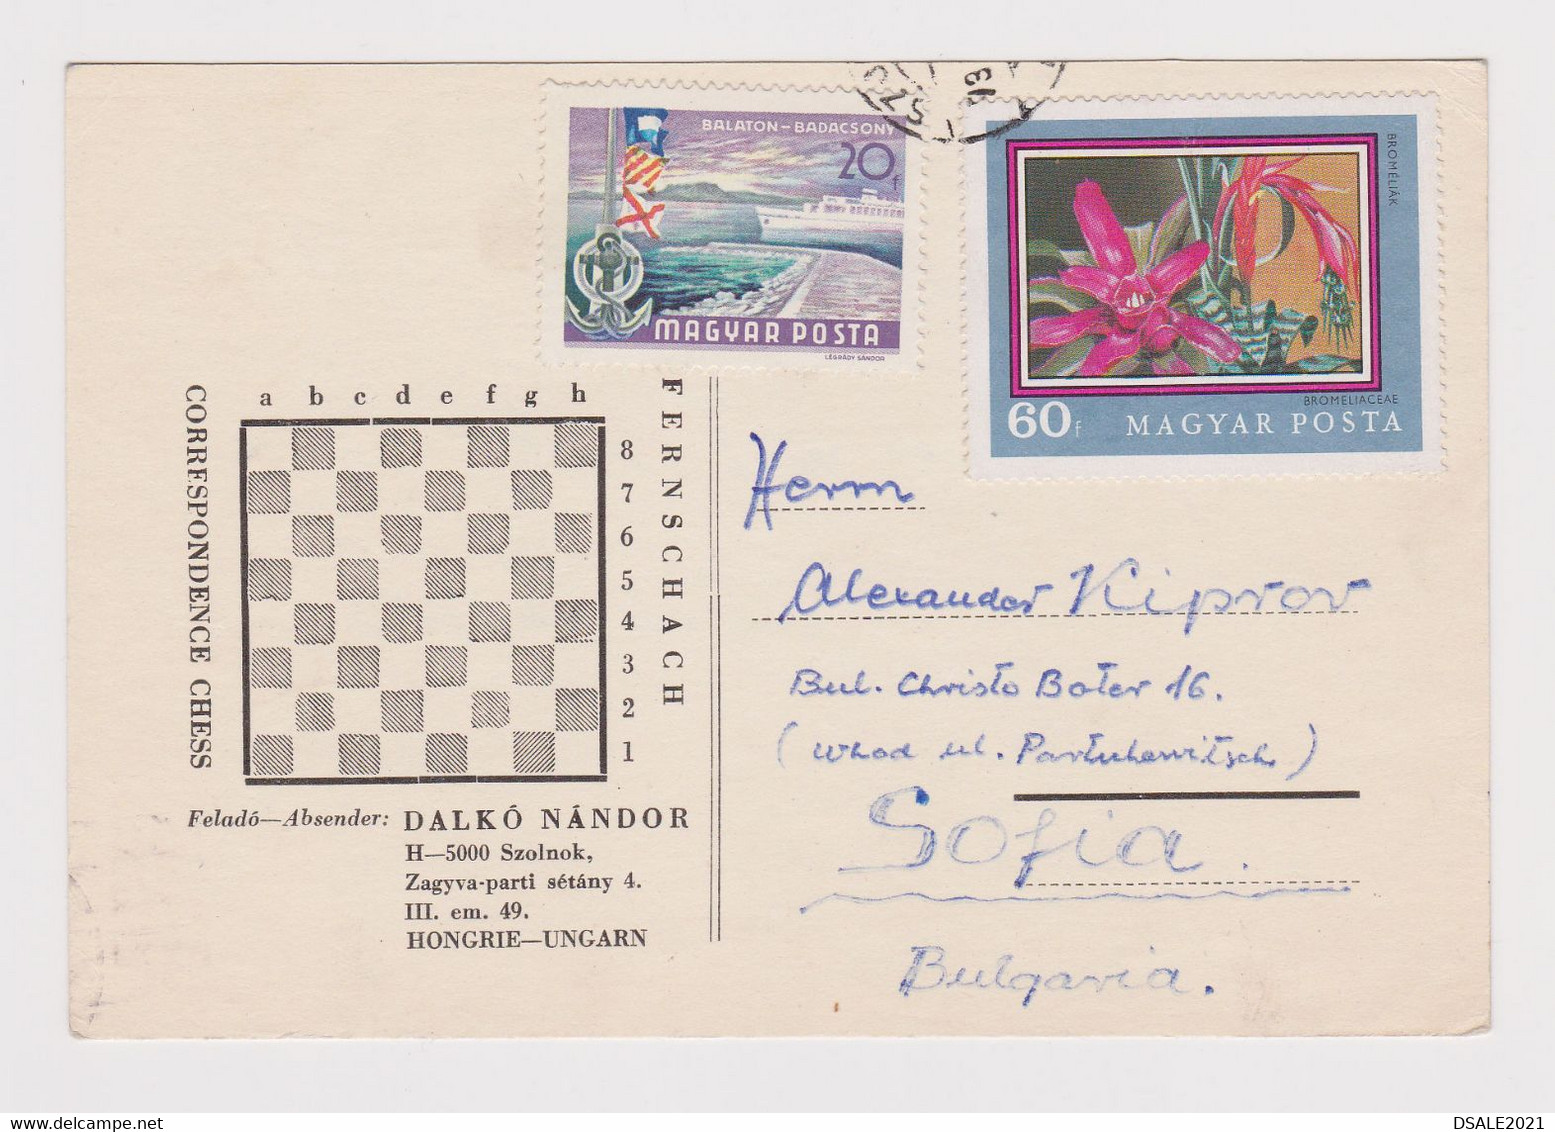 Hungary Ungarn Ungheria Hongrie 1973 Chess Card W/Topic Stamps Lake Balaton, Flower (Bromeliad) Sent To Bulgaria /39640 - Covers & Documents